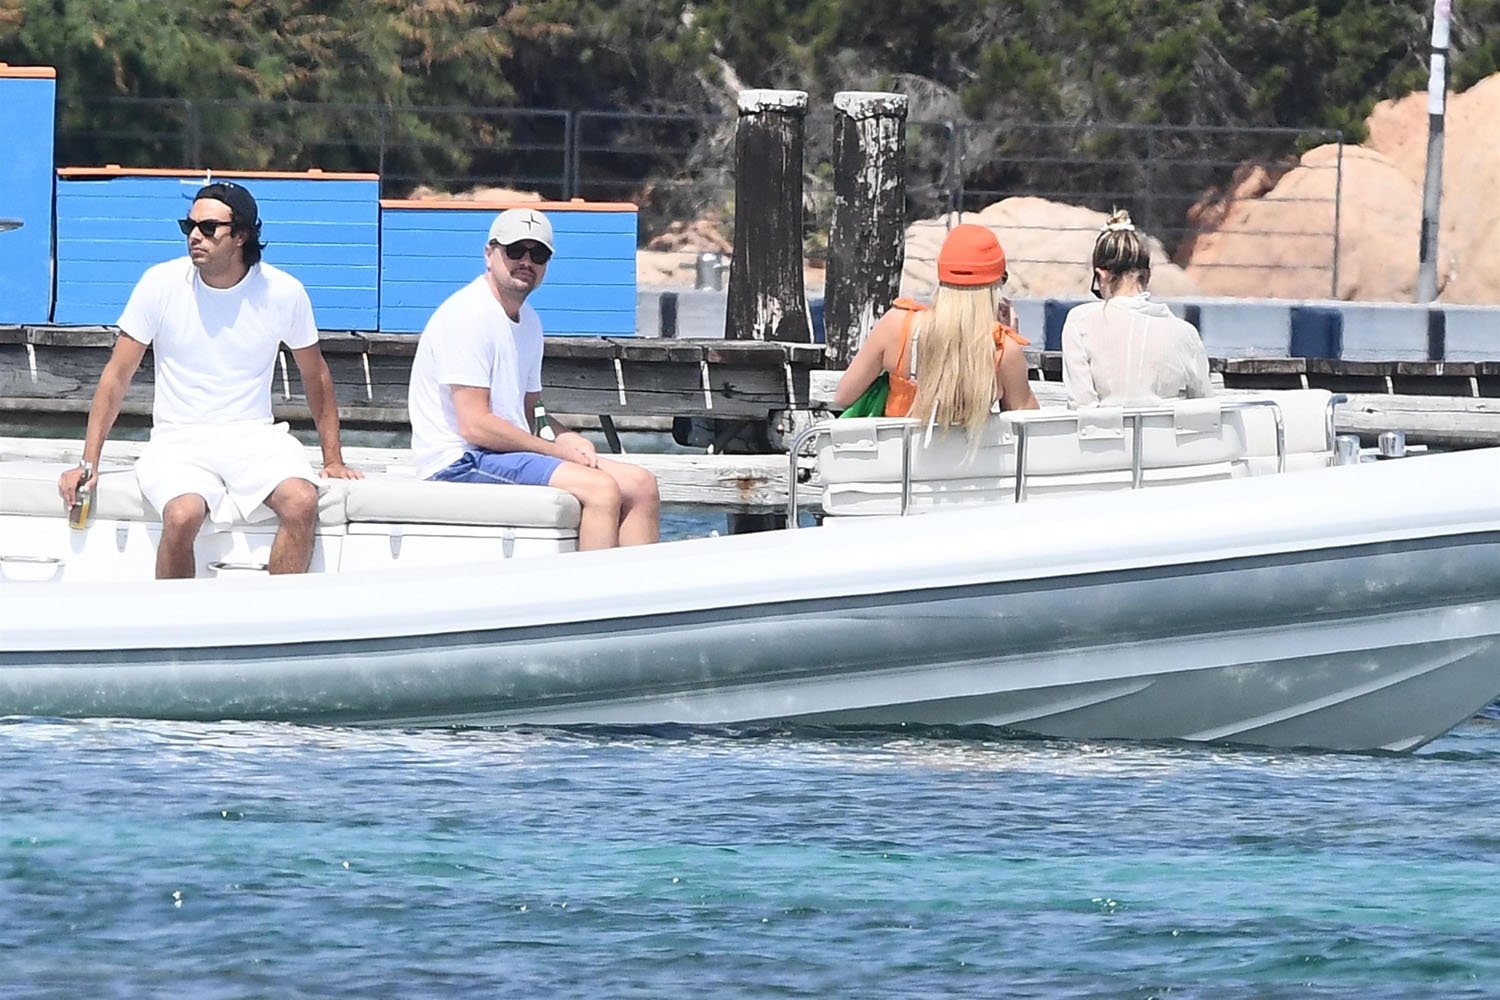 Tobey Maguire joins Leonardo DiCaprio aboard luxury yacht in St Barths